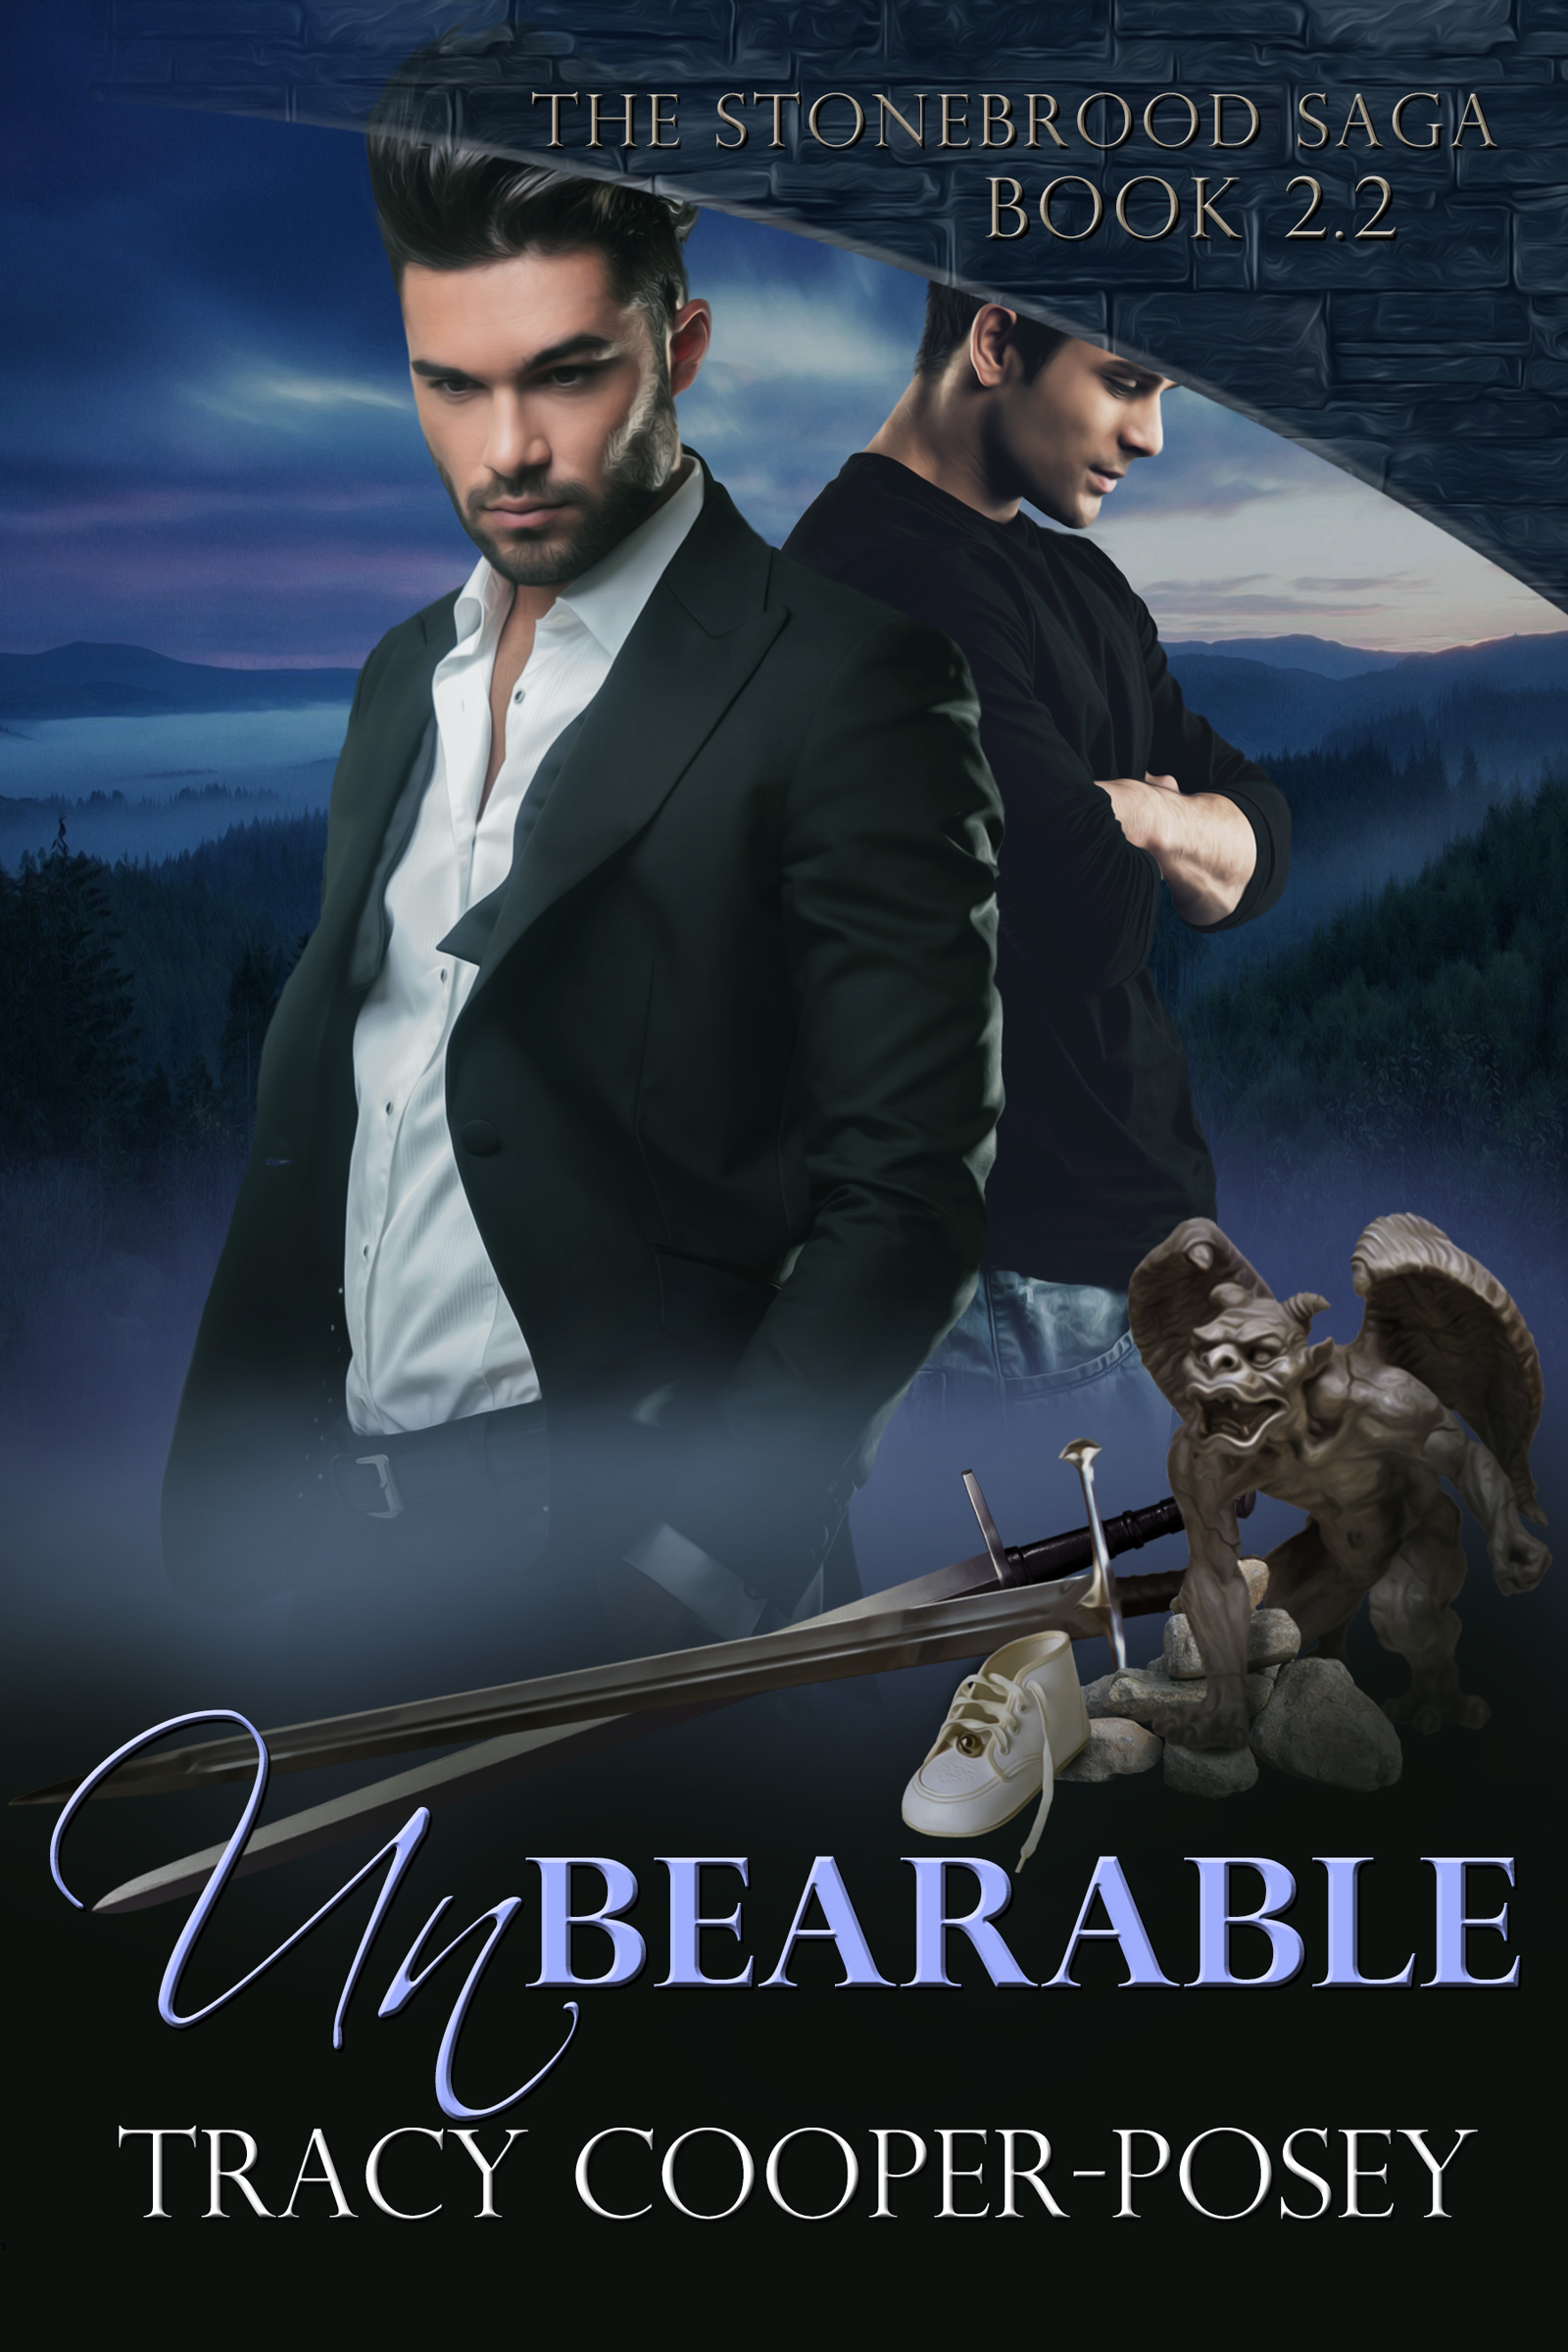 Unbearable (2016) by Tracy Cooper-Posey